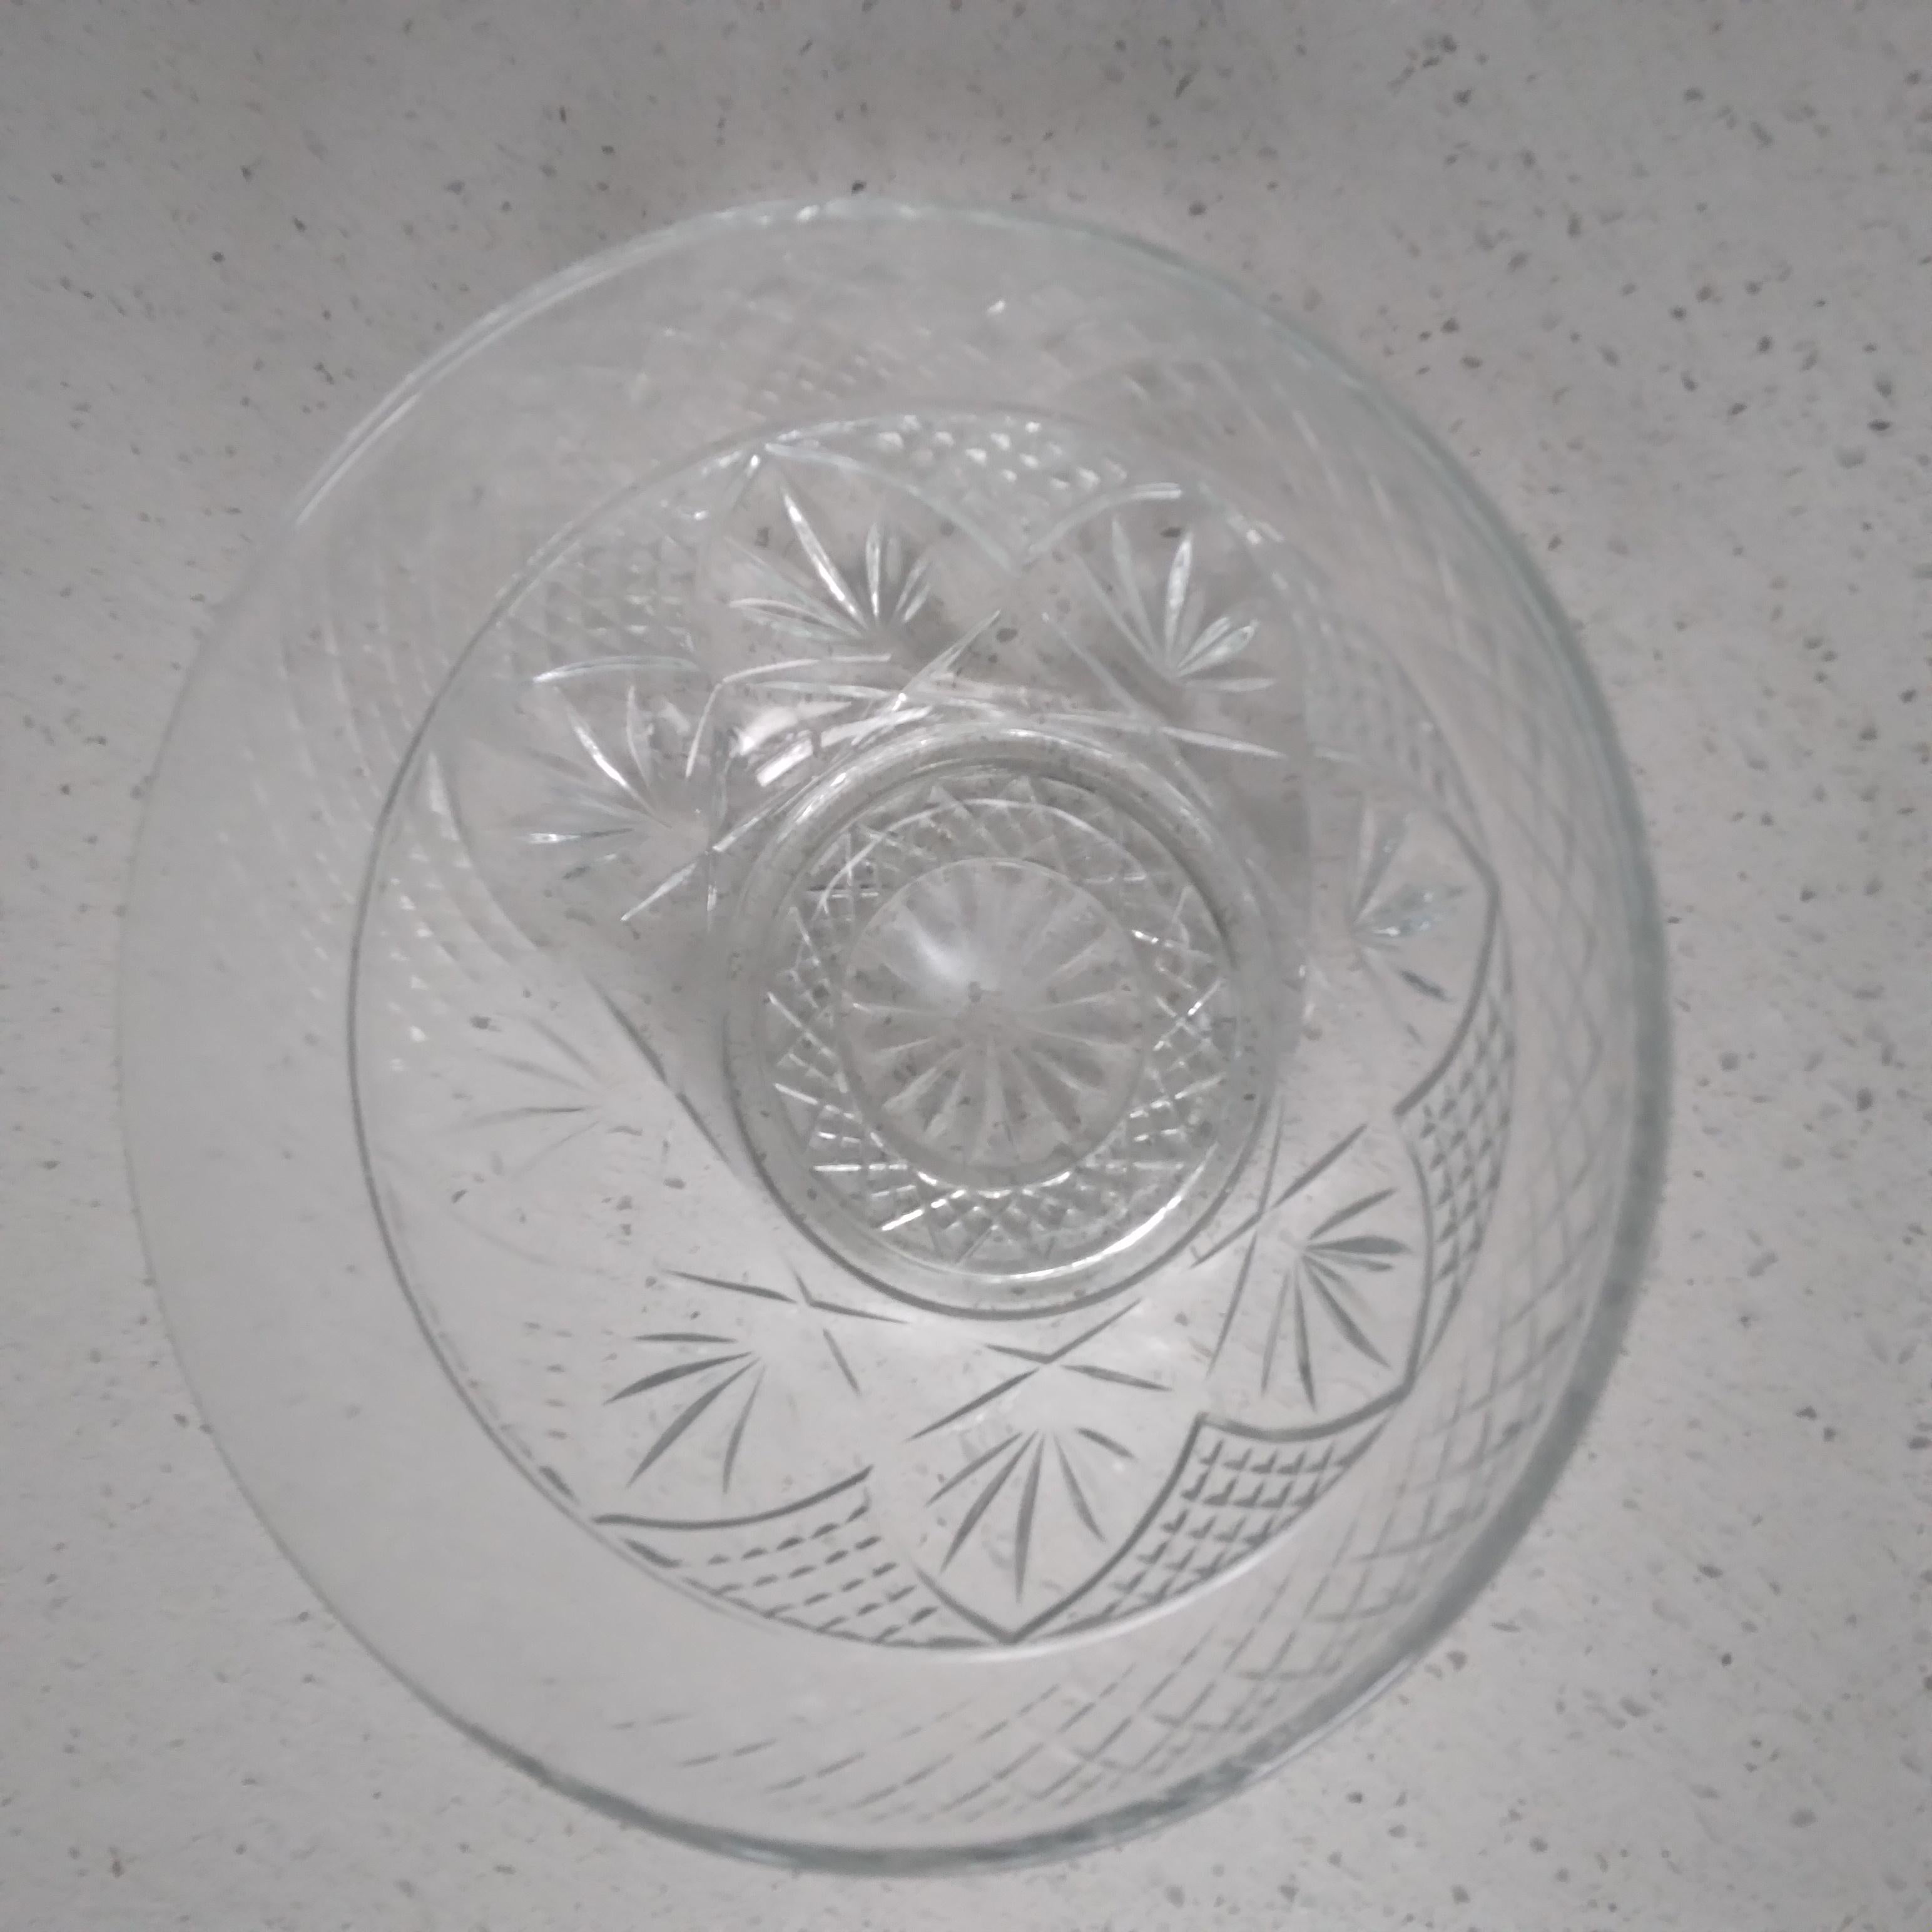 Beautifully translucent, this vintage glass bowl is ready to add light and artistry to your decor. We love intricate fan and diamond motif! In excellent condition.